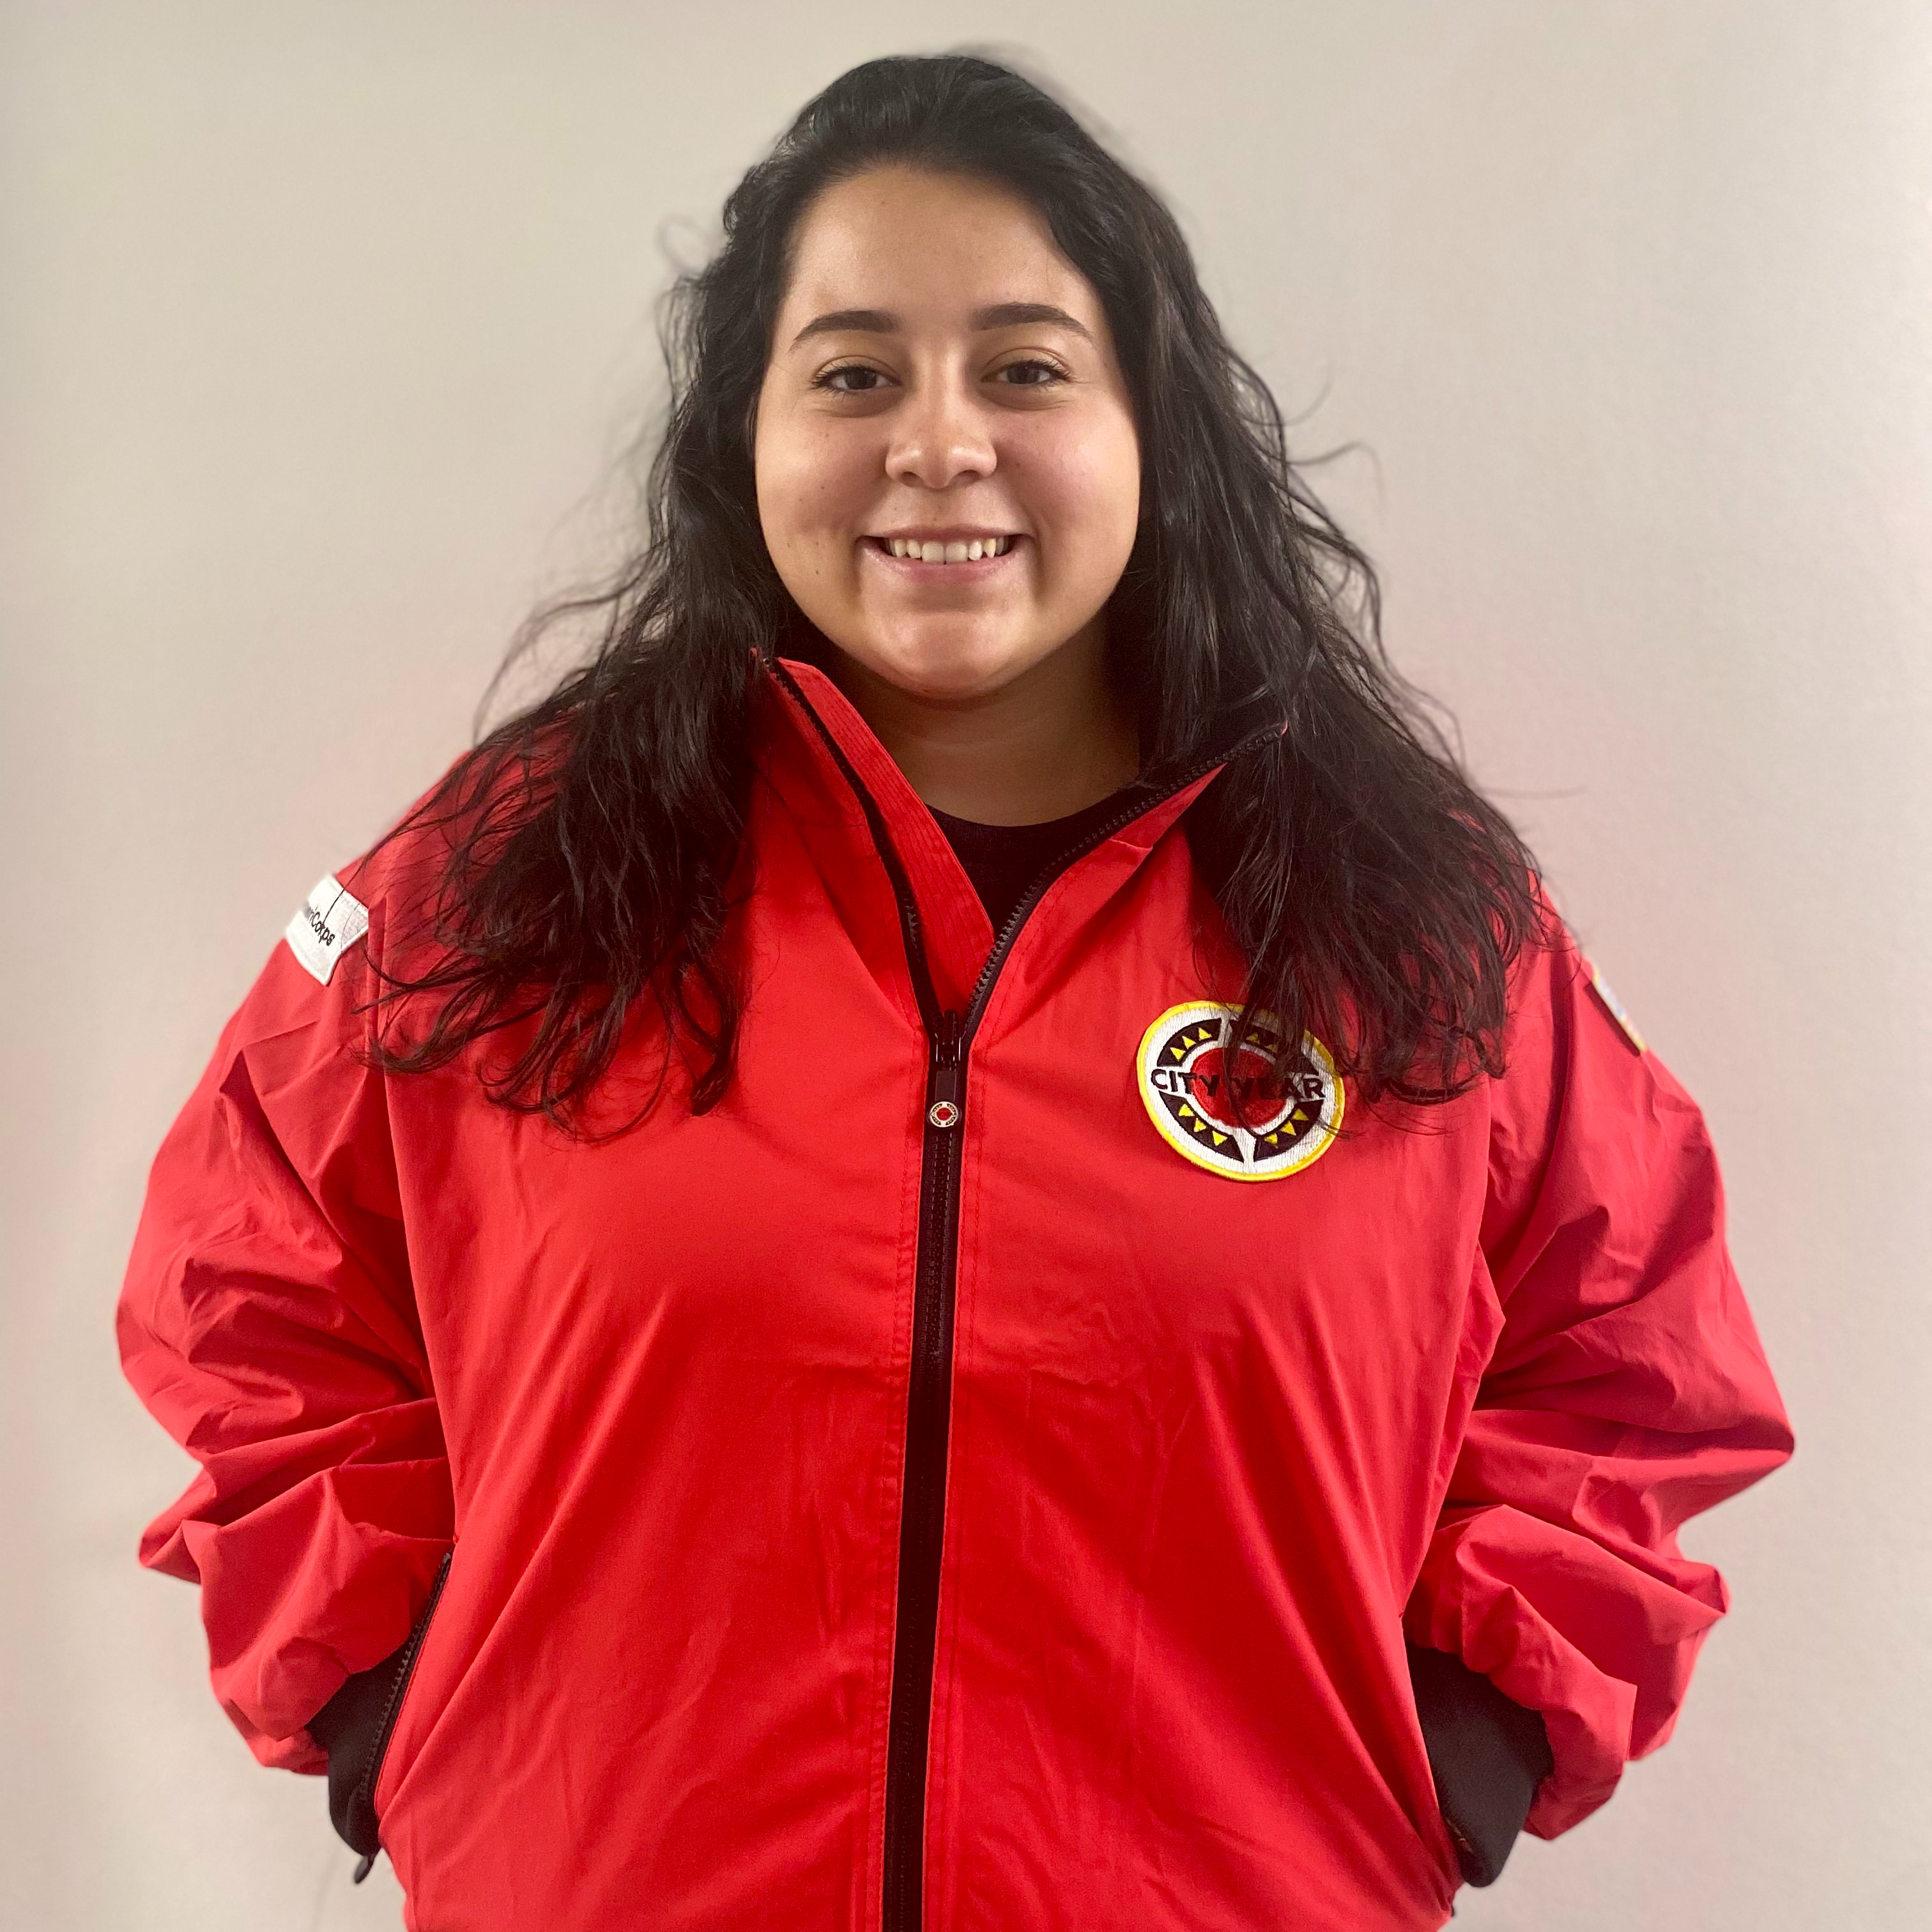 Woman with dark hair wearing red City Year jacket